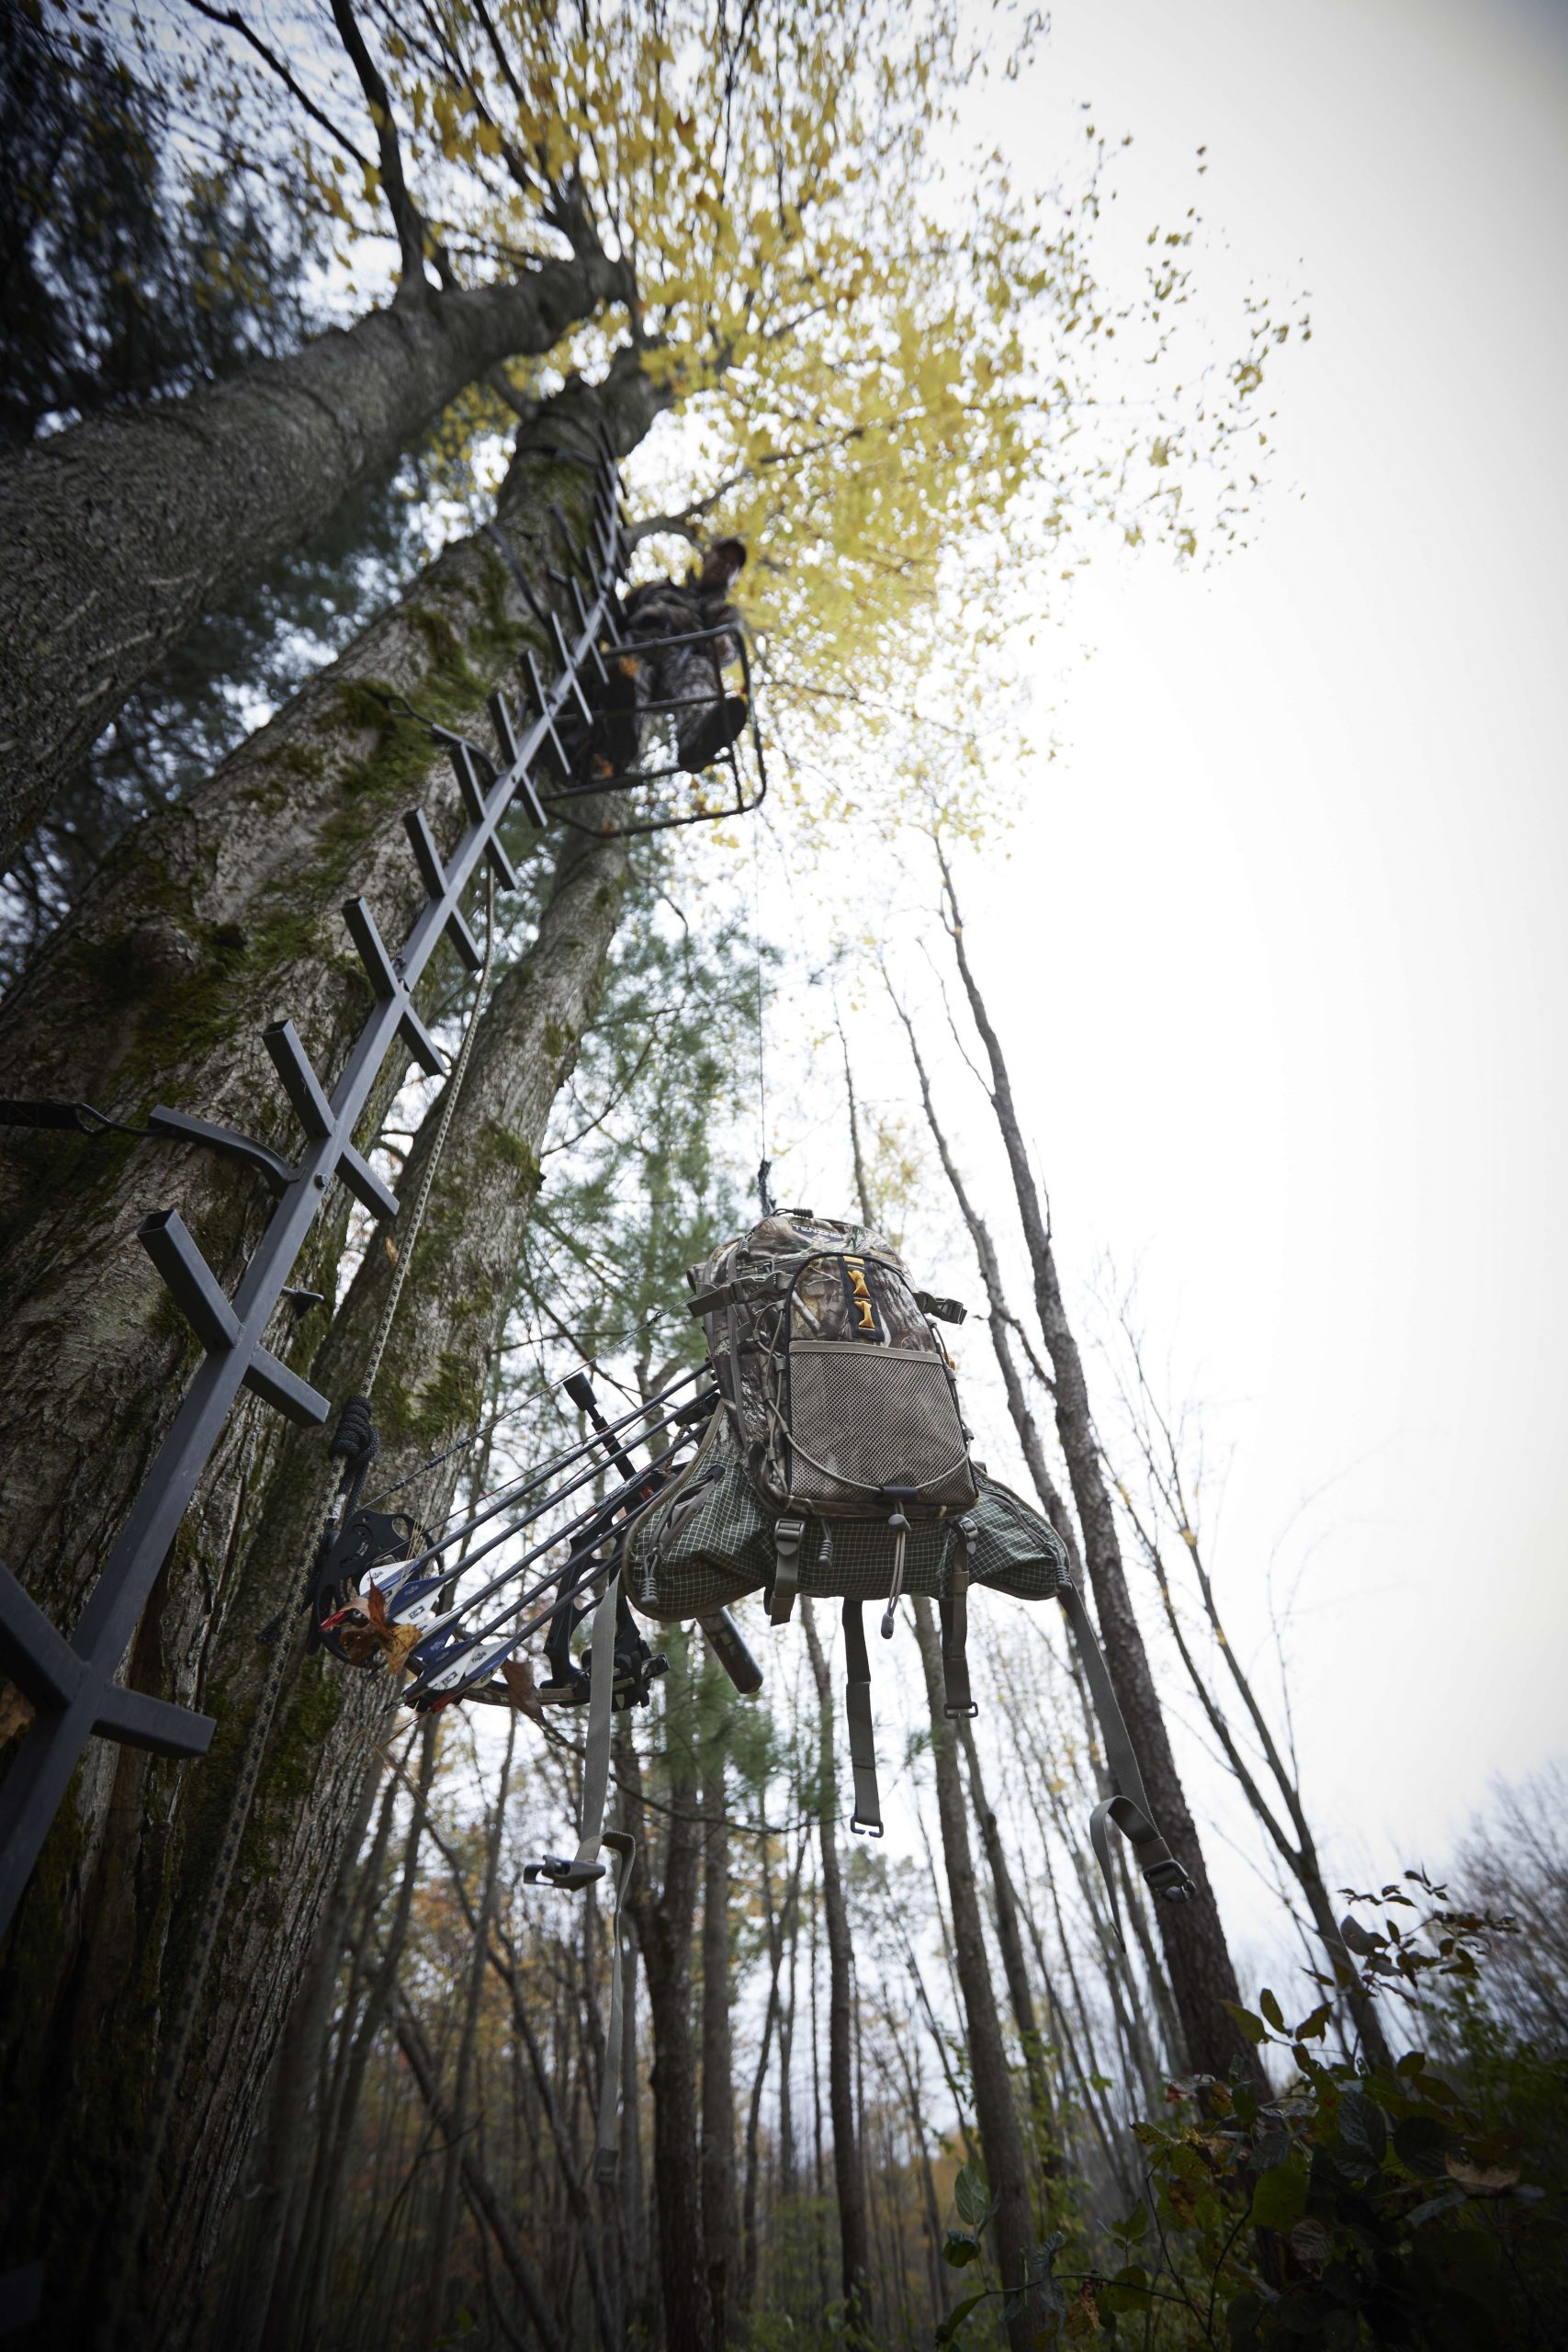 Once he's connected his safety harness, he hauls up his bow and Tenzing backpack holding the rest of his gear.